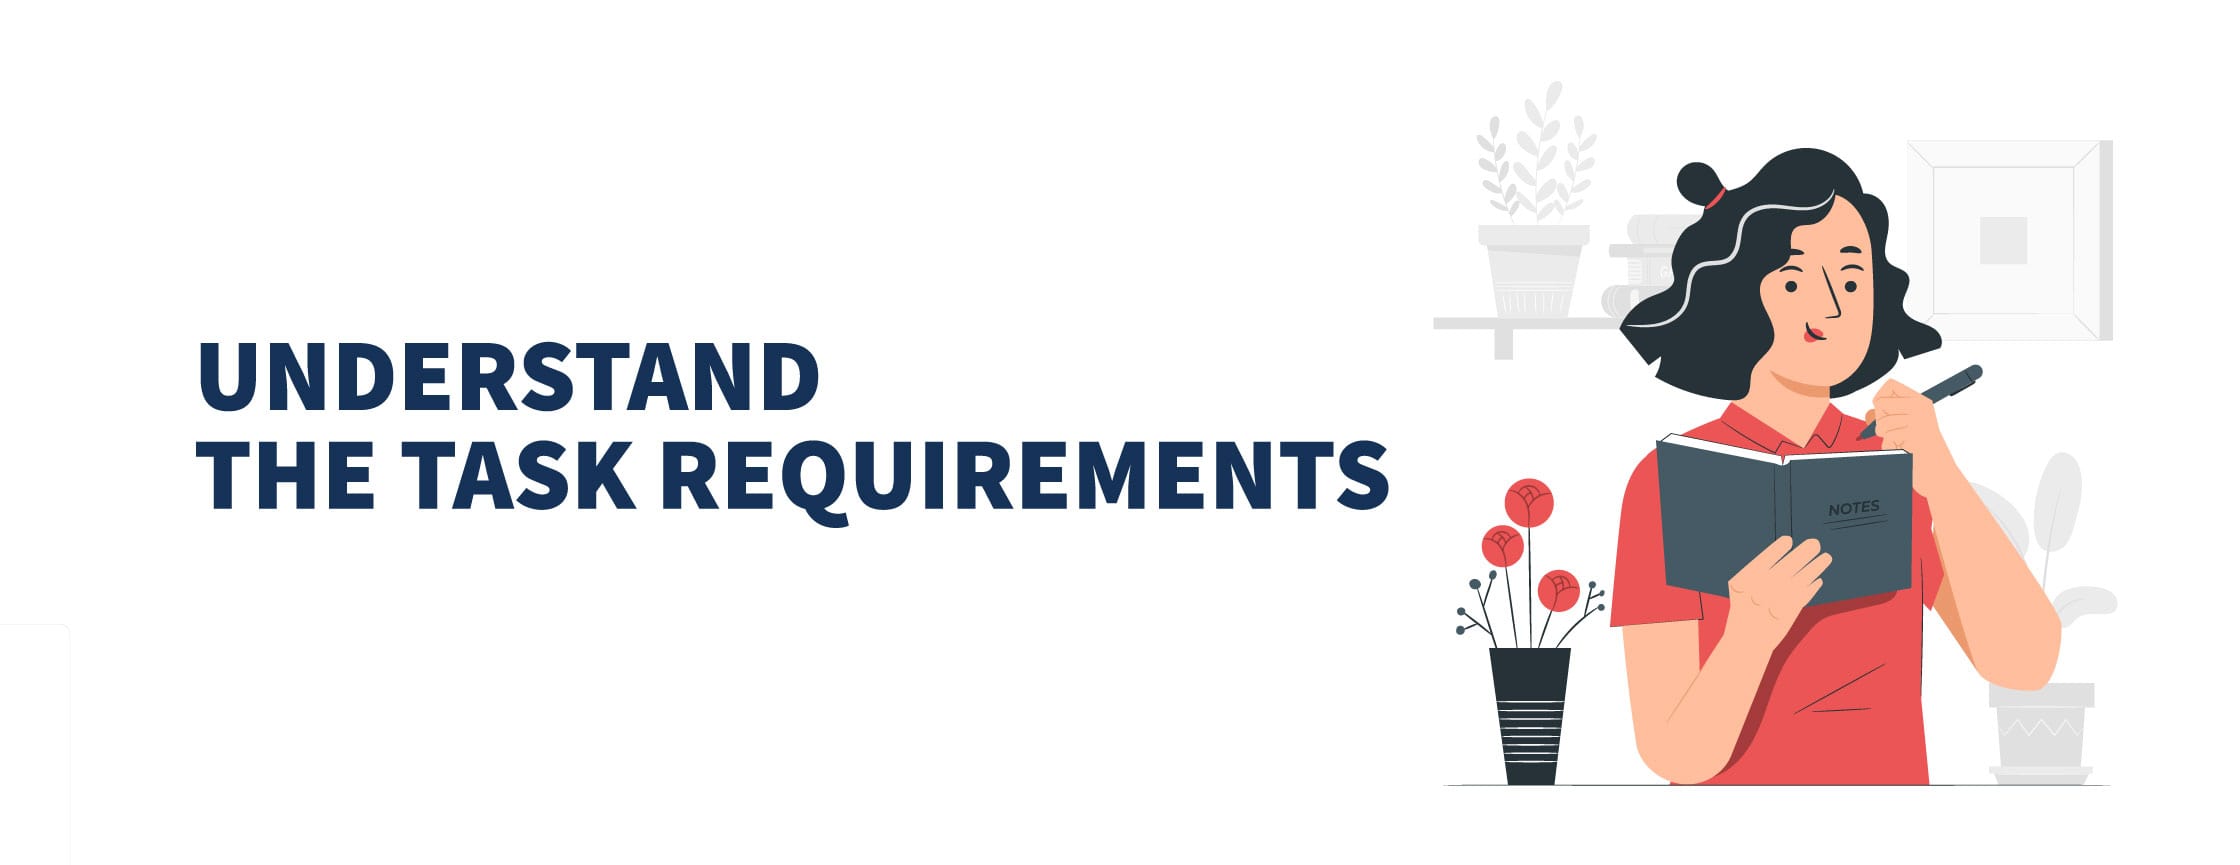 Understand the Task Requirements